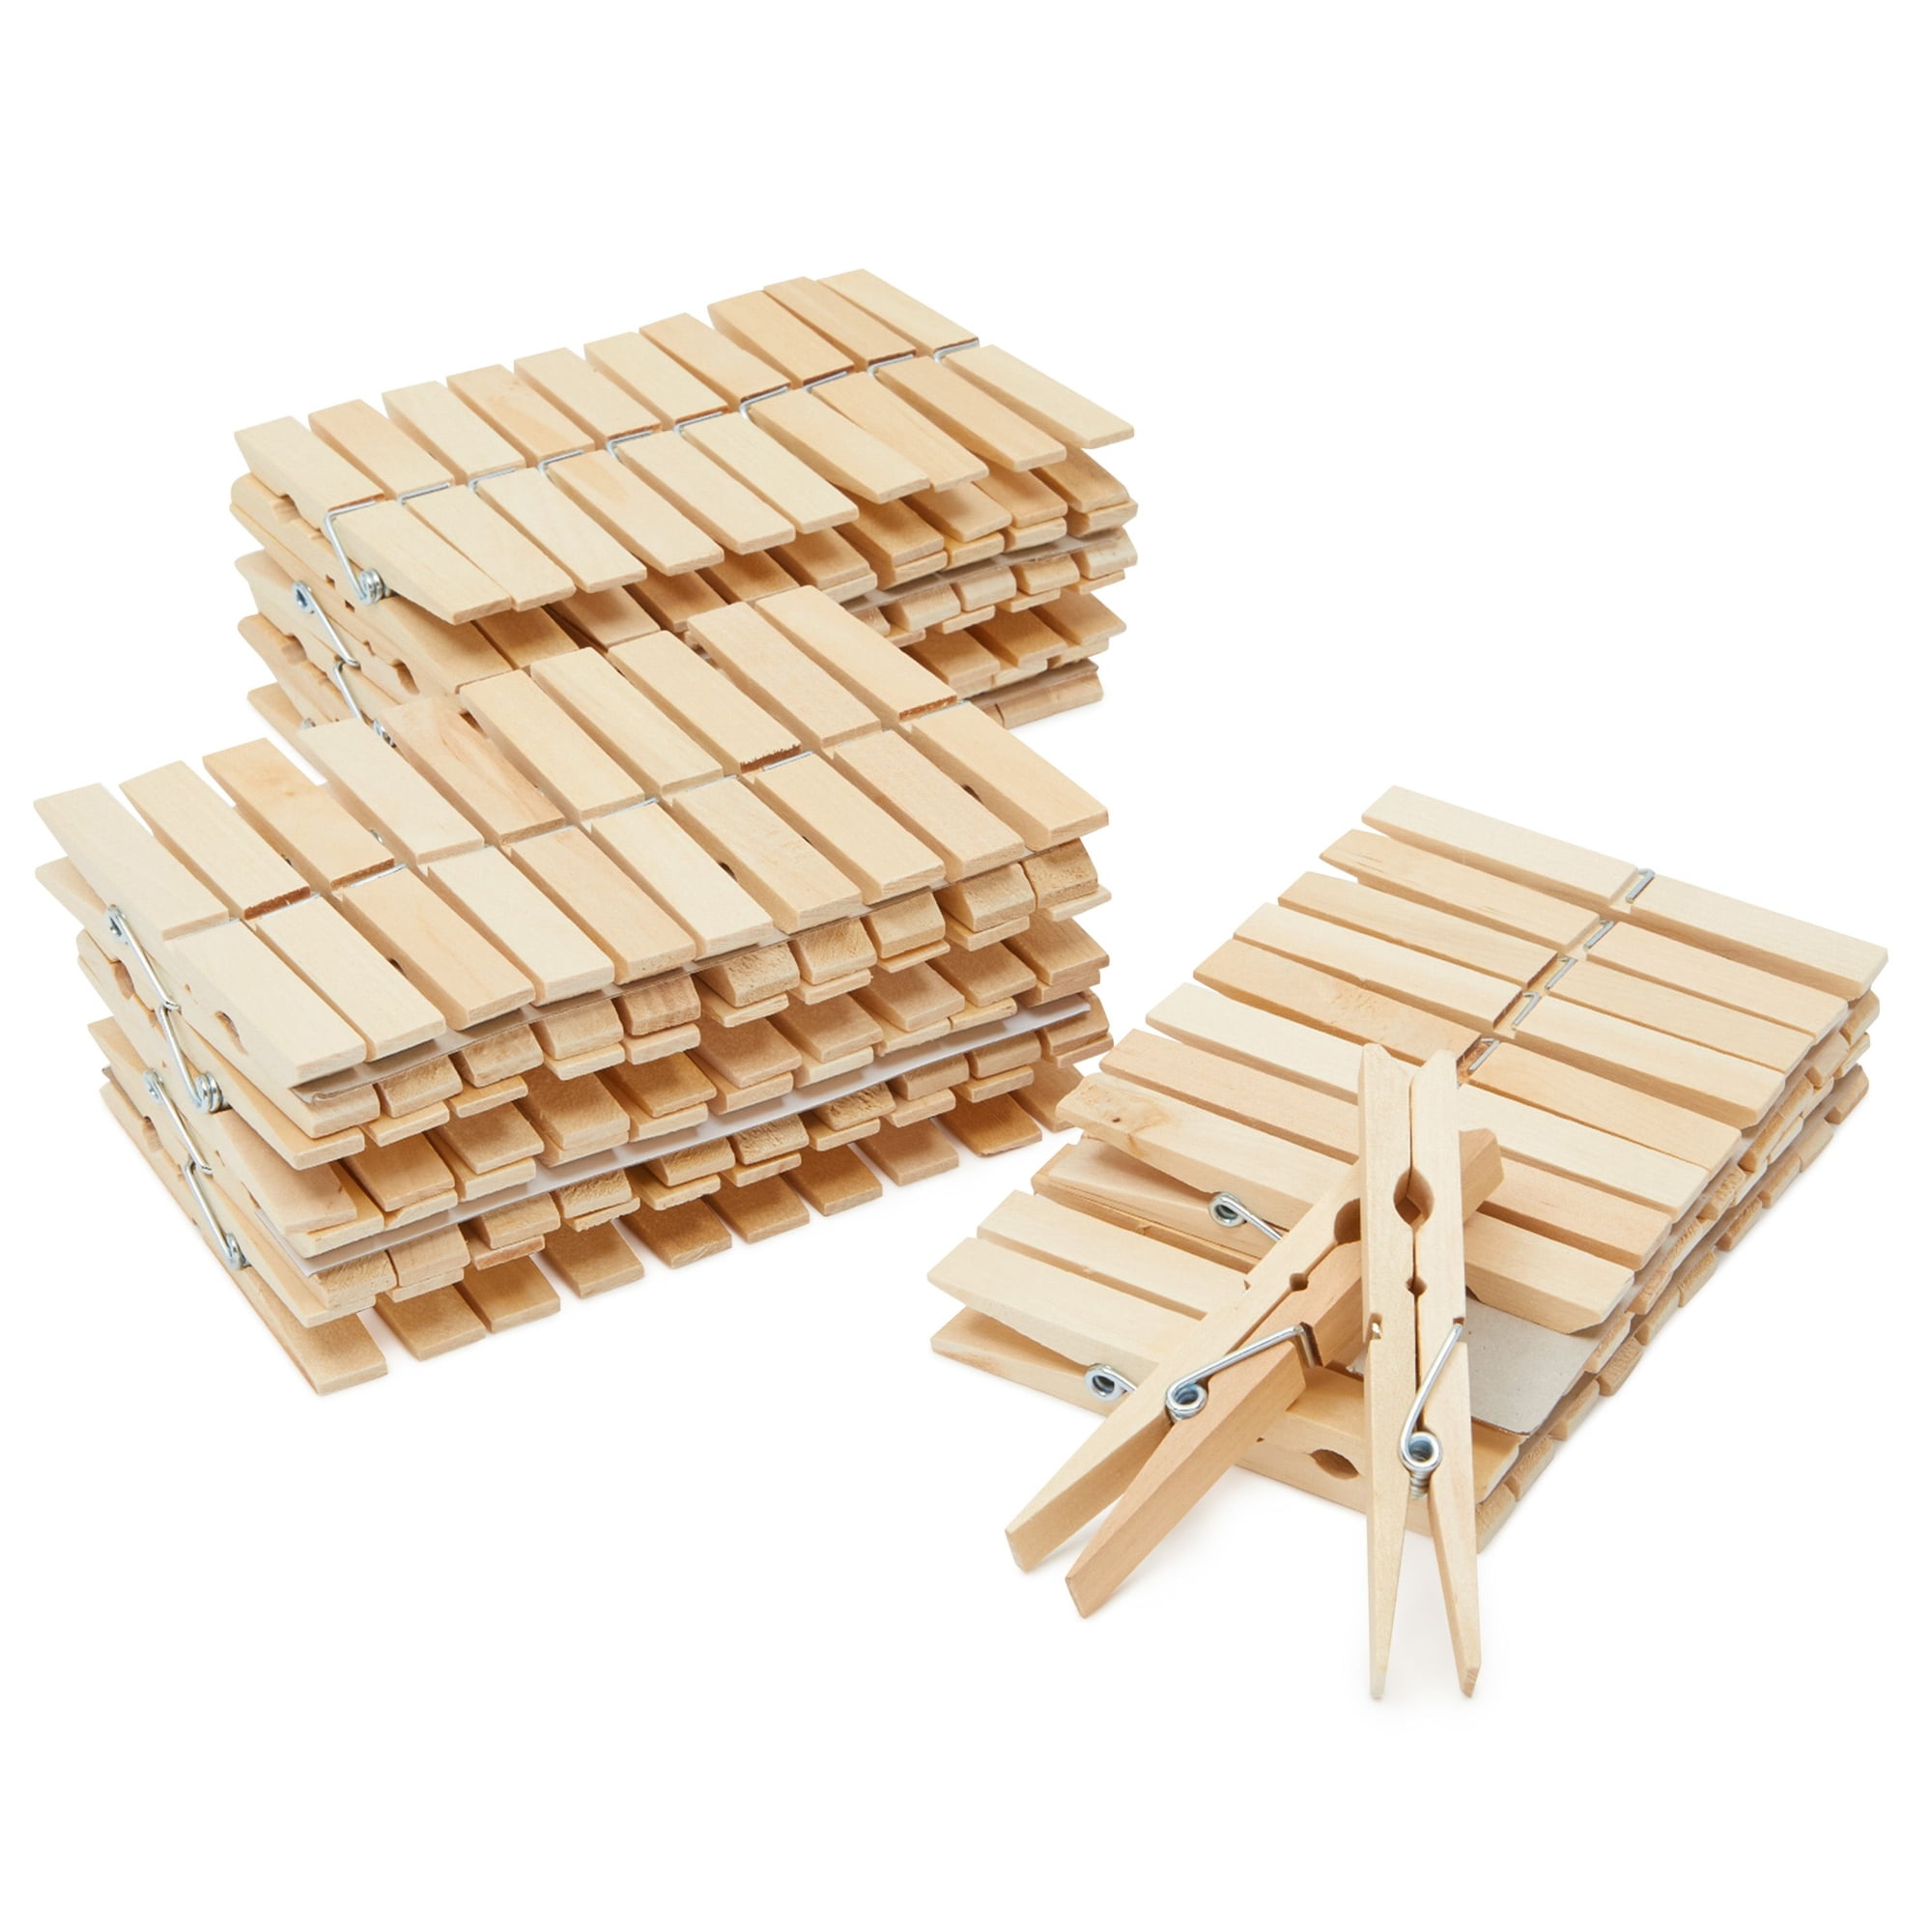 Knorr Prandell 45mm x 7mm Mini Wooden Clothes Pegs - 100pcs